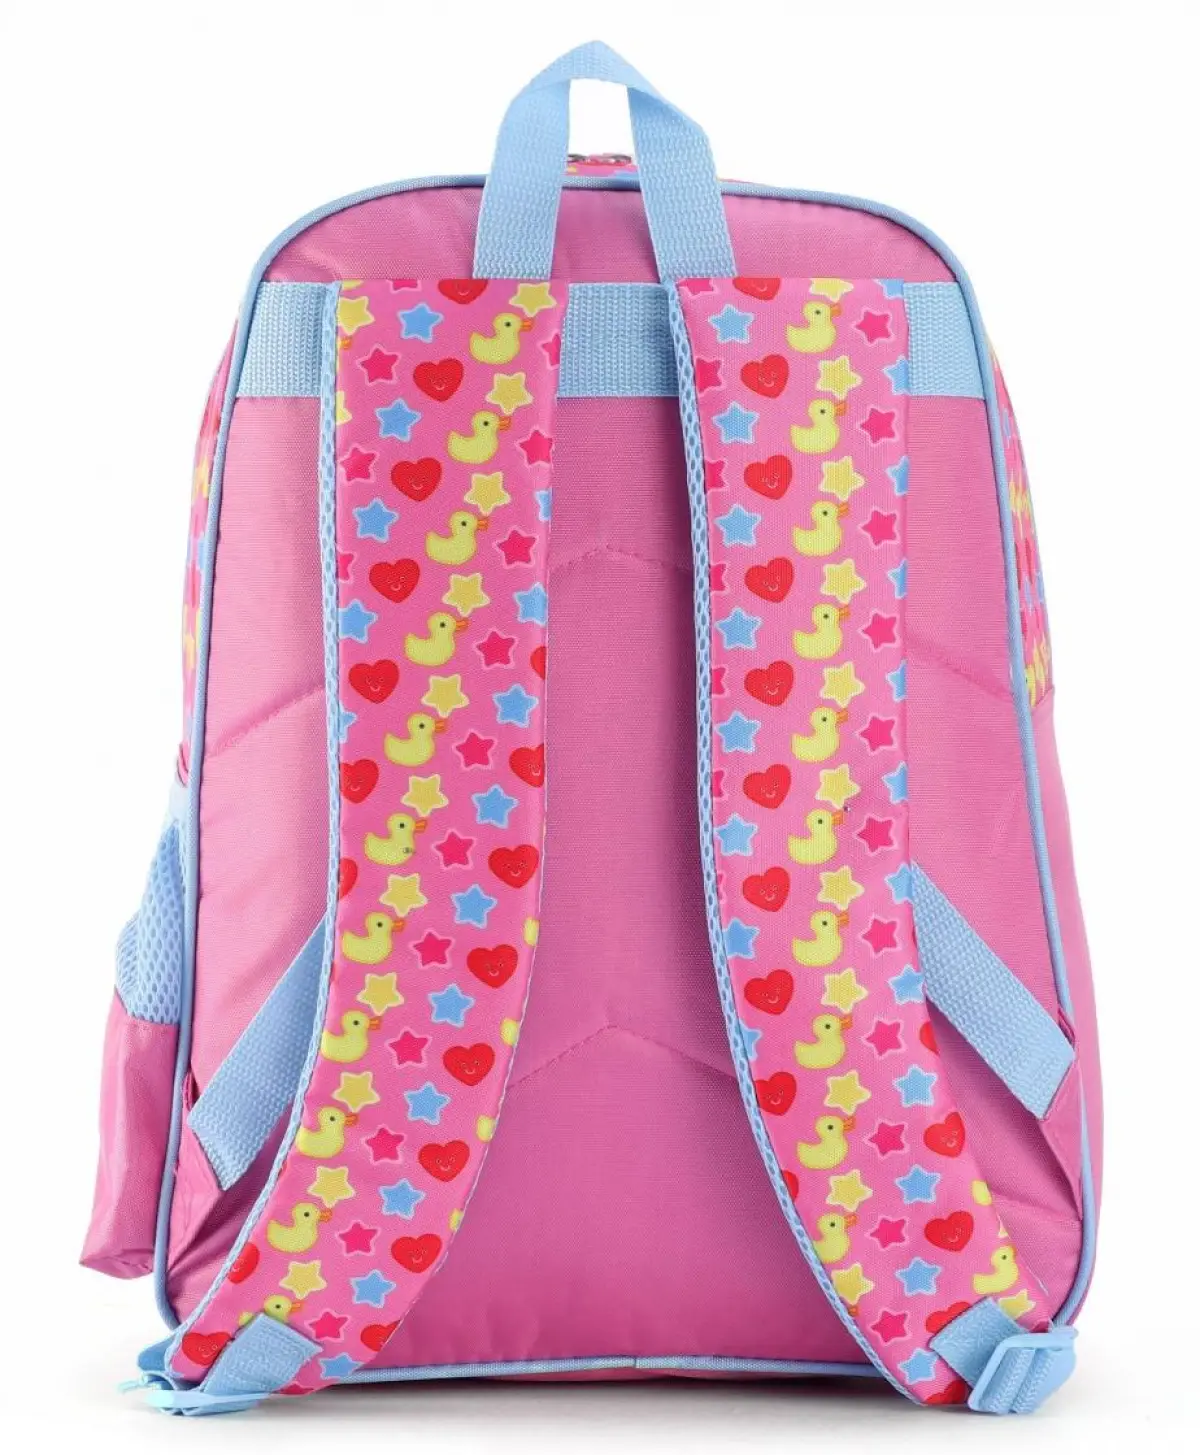 Striders 14 inches Peppa Pig-Inspired School Bag for Little Explorers Multicolor For Kids Ages 3Y+